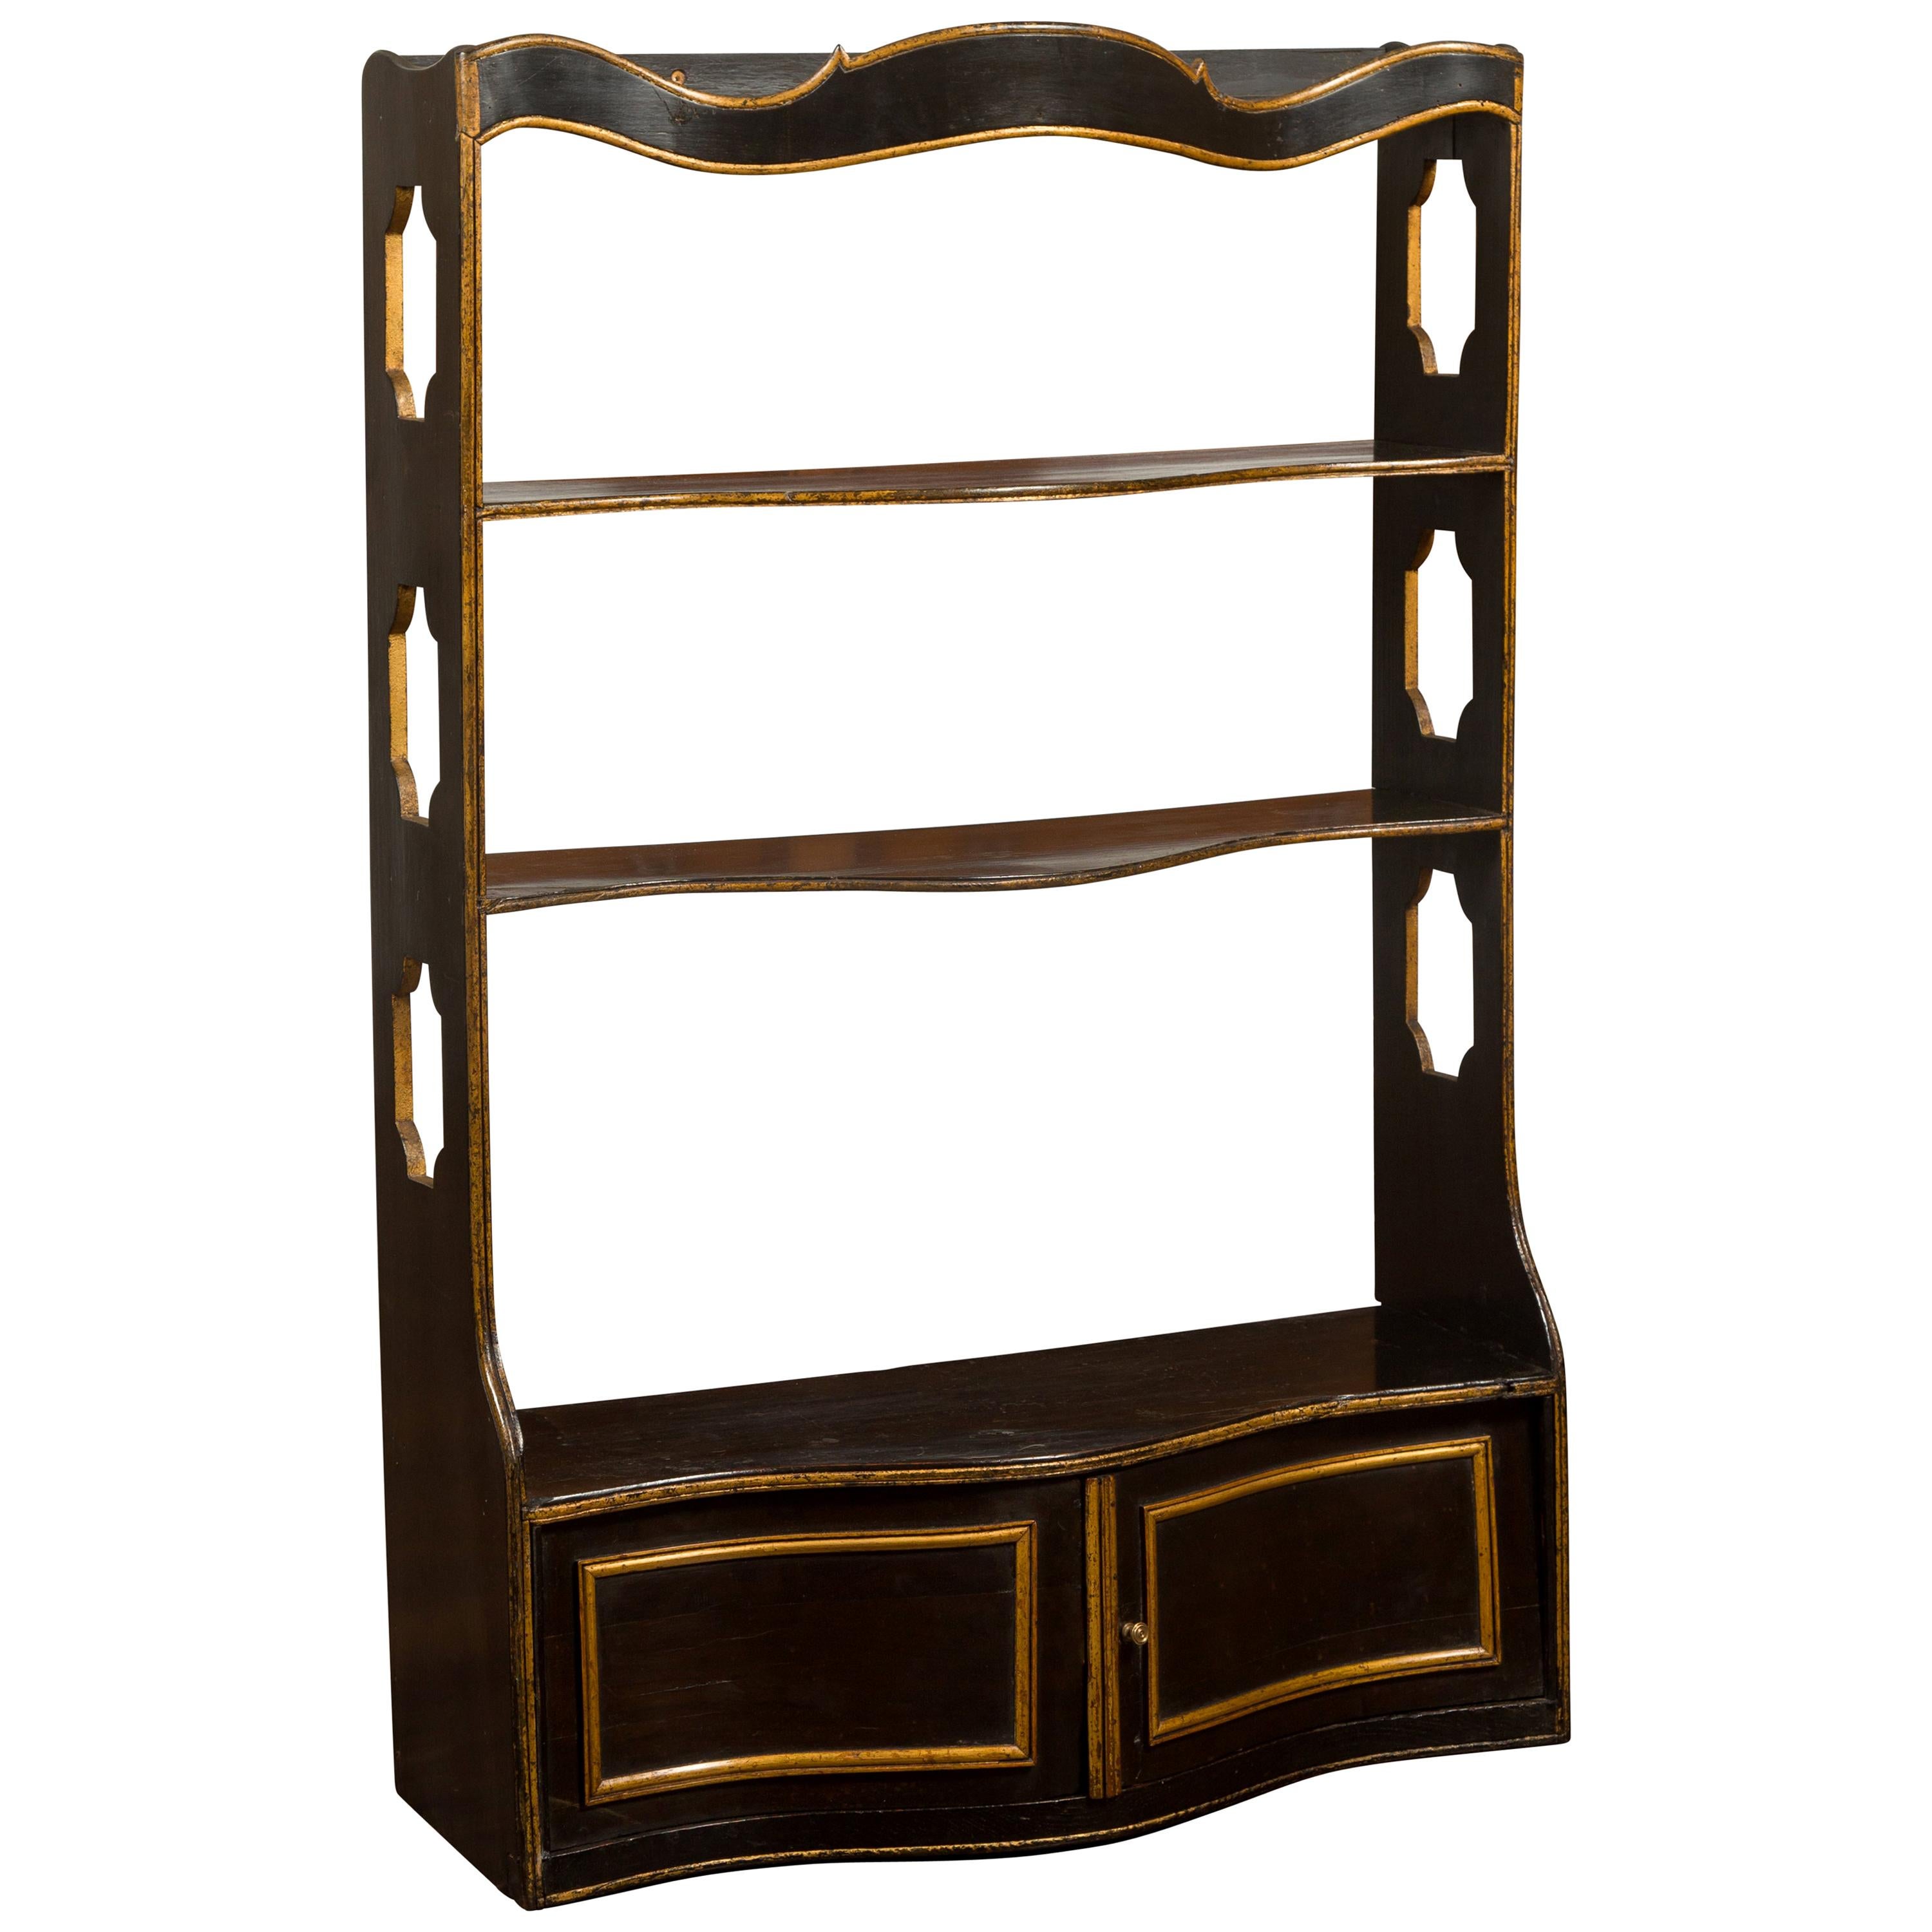 English 1830s Regency Black and Gold Serpentine Front Wall Hanging Shelf